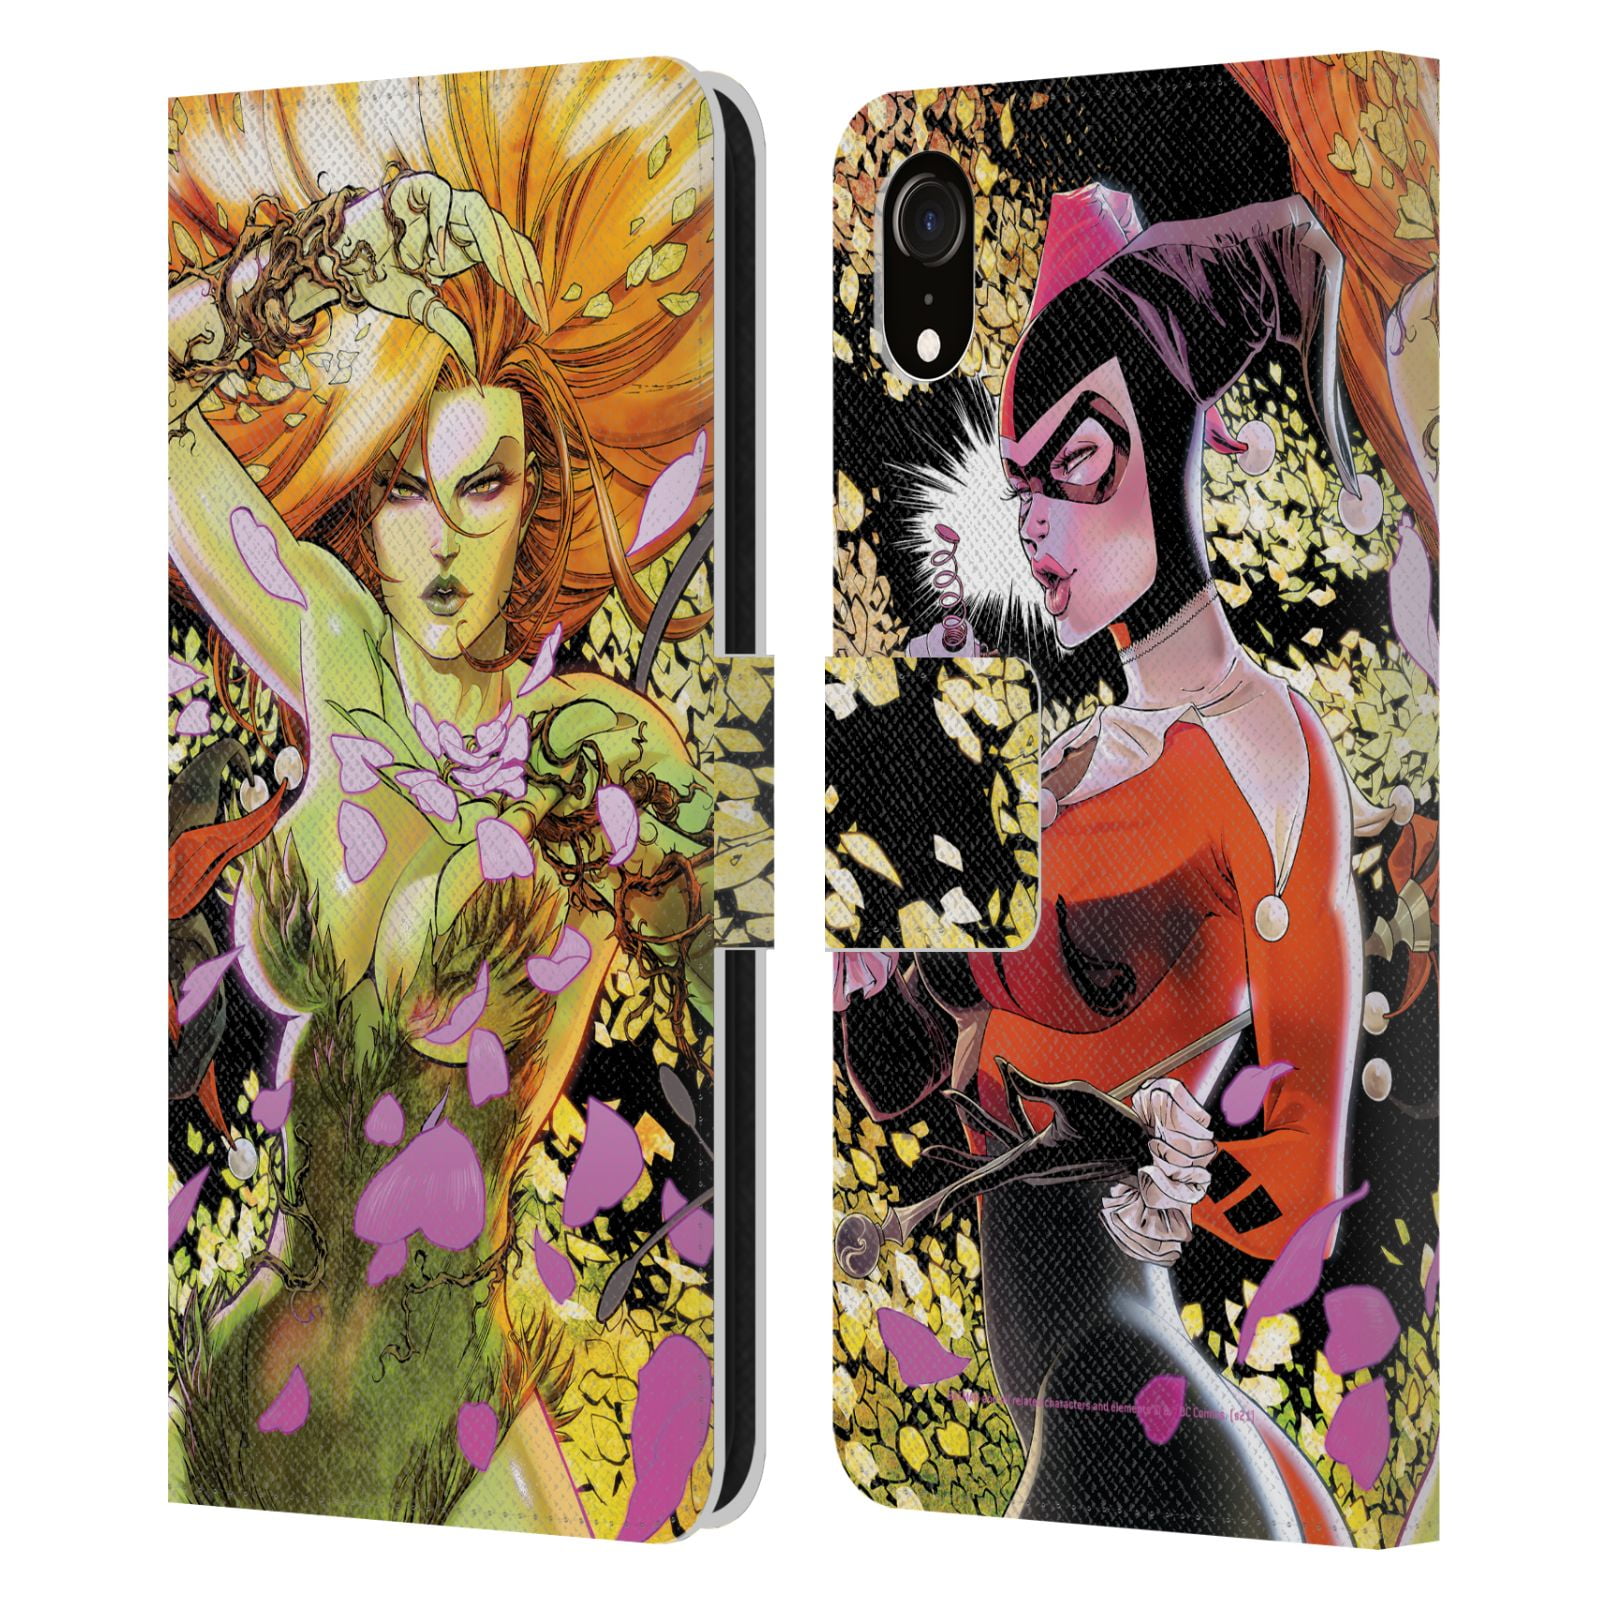 Head Case Designs Officially Licensed Batman DC Comics Gotham City Sirens  Poison Ivy Leather Book Wallet Case Cover Compatible with Apple iPhone XR -  